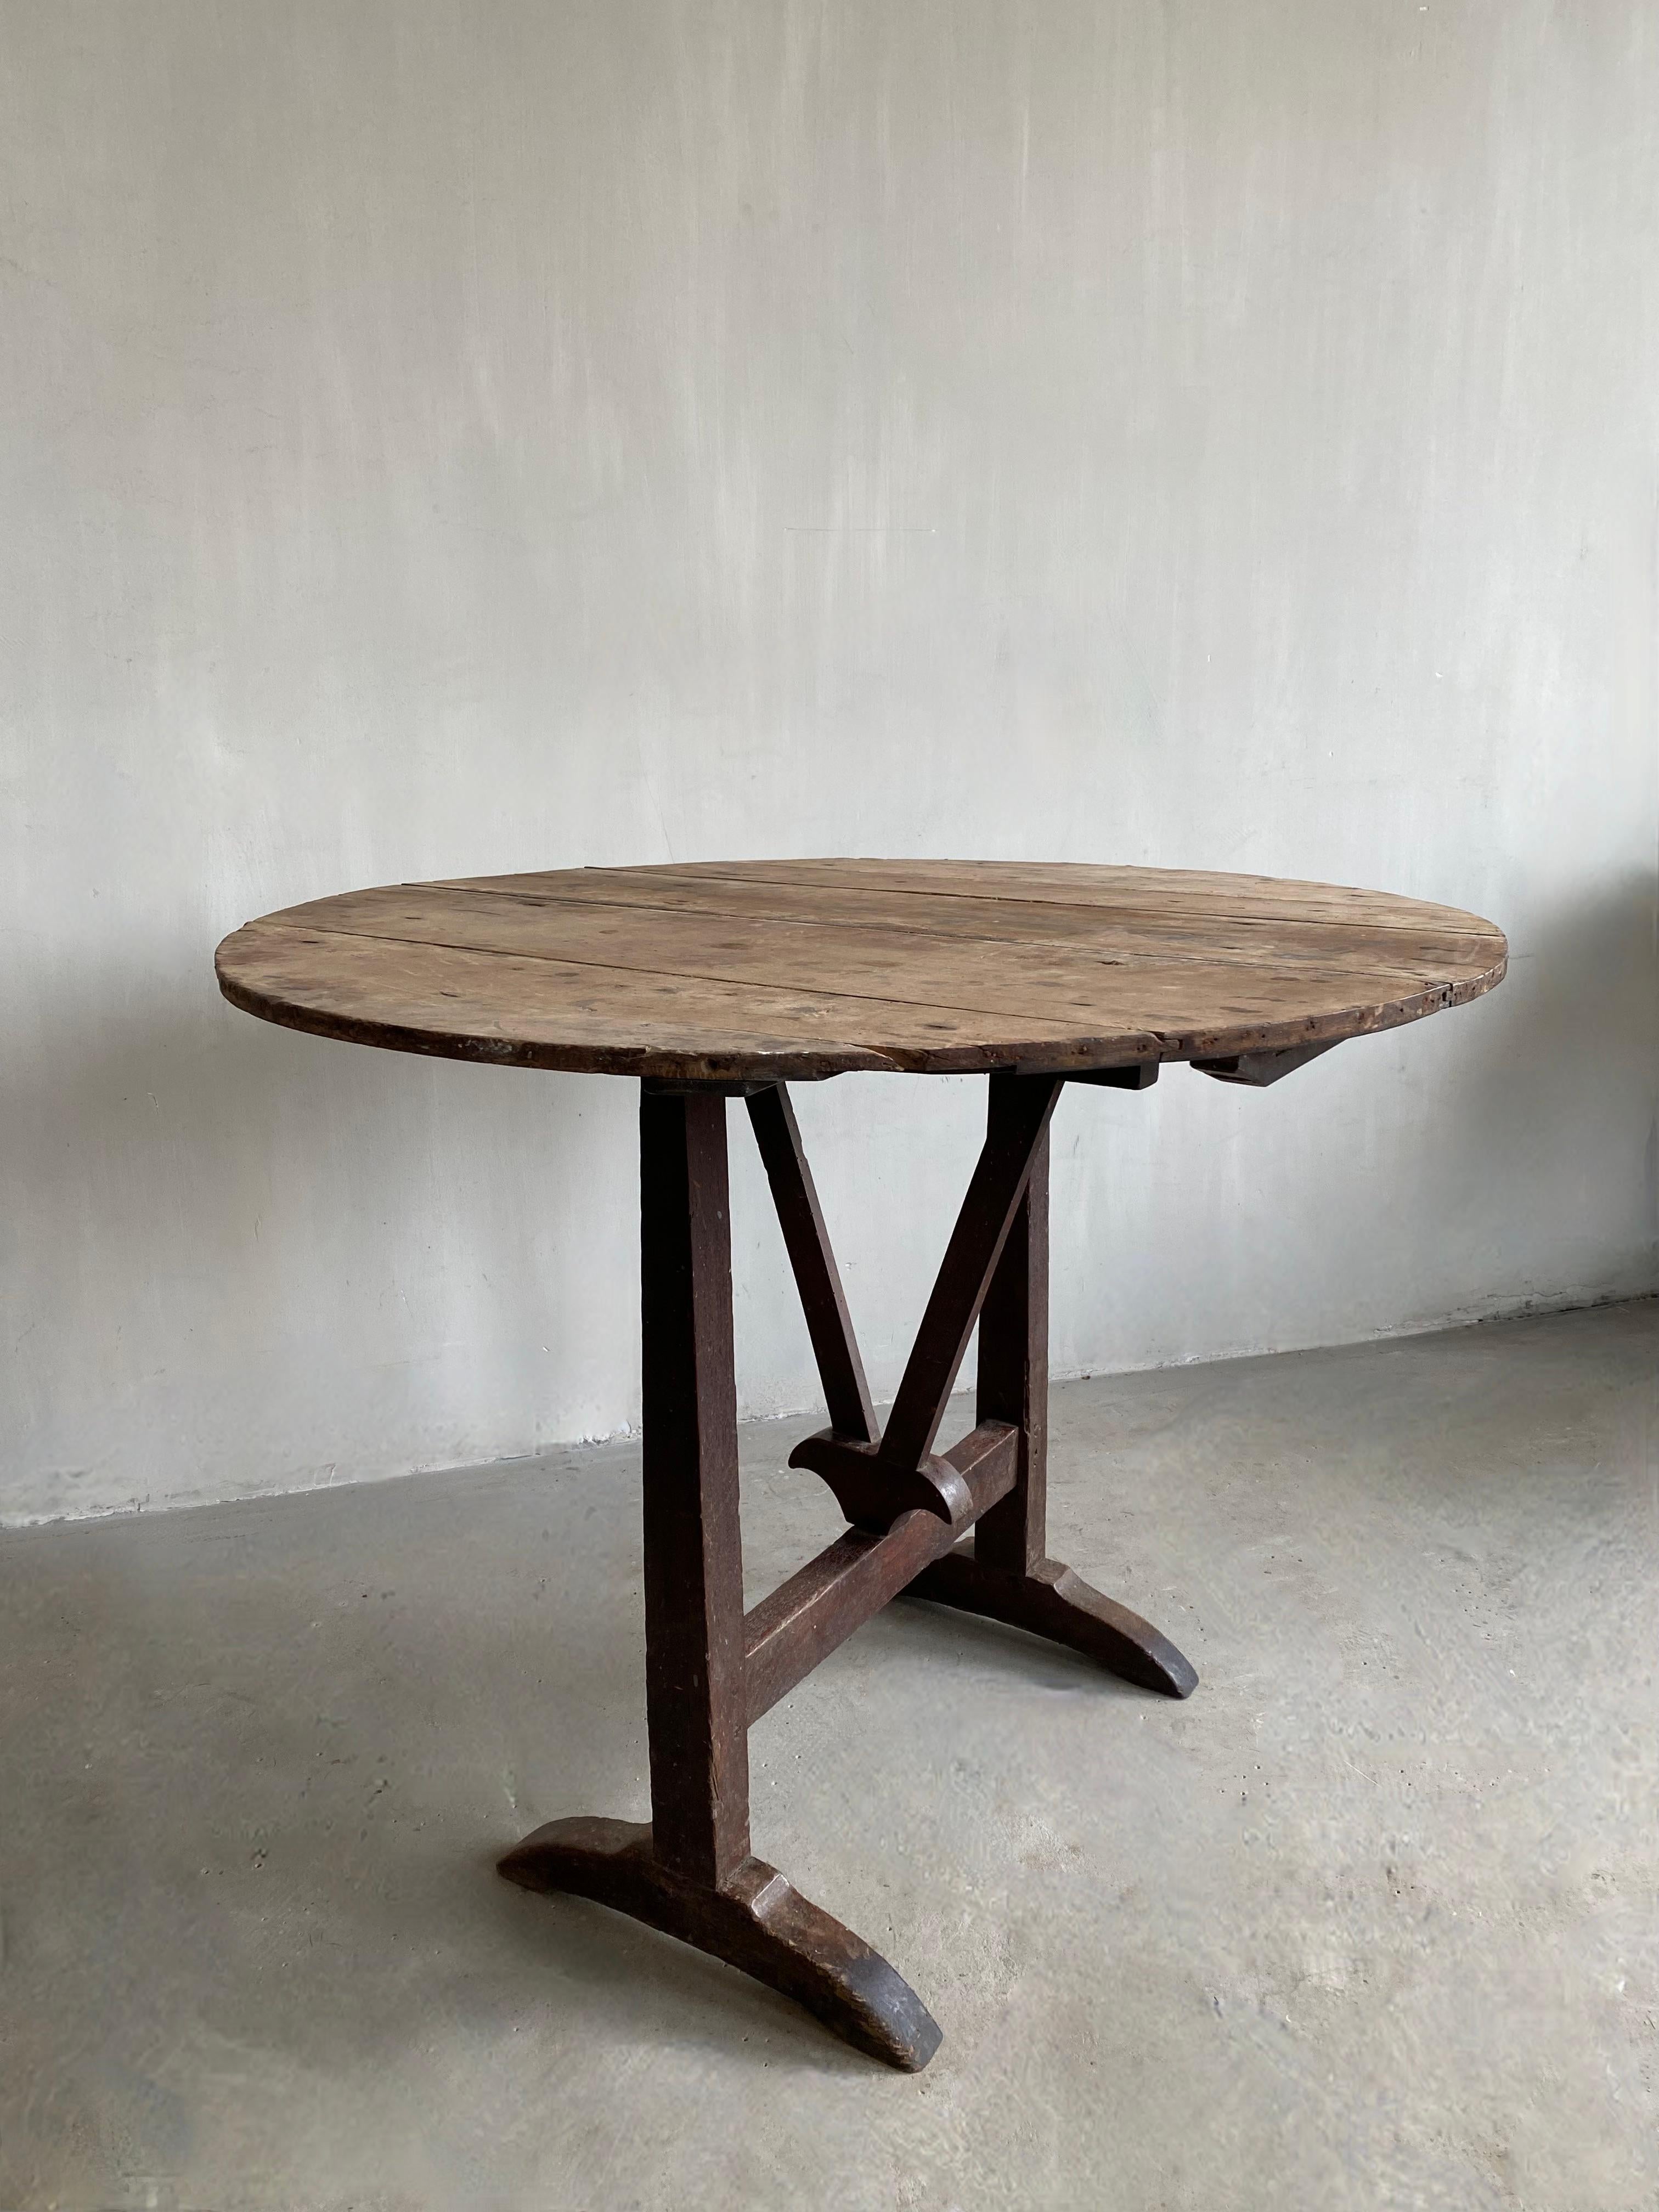 This 19th century French wine tasters table has a beautiful patina from use.
The refinement of the leg set makes it elegant.
Beautiful piece next to a sofa, bed,....

We ship safely worldwide, feel free to request a calculation.
​